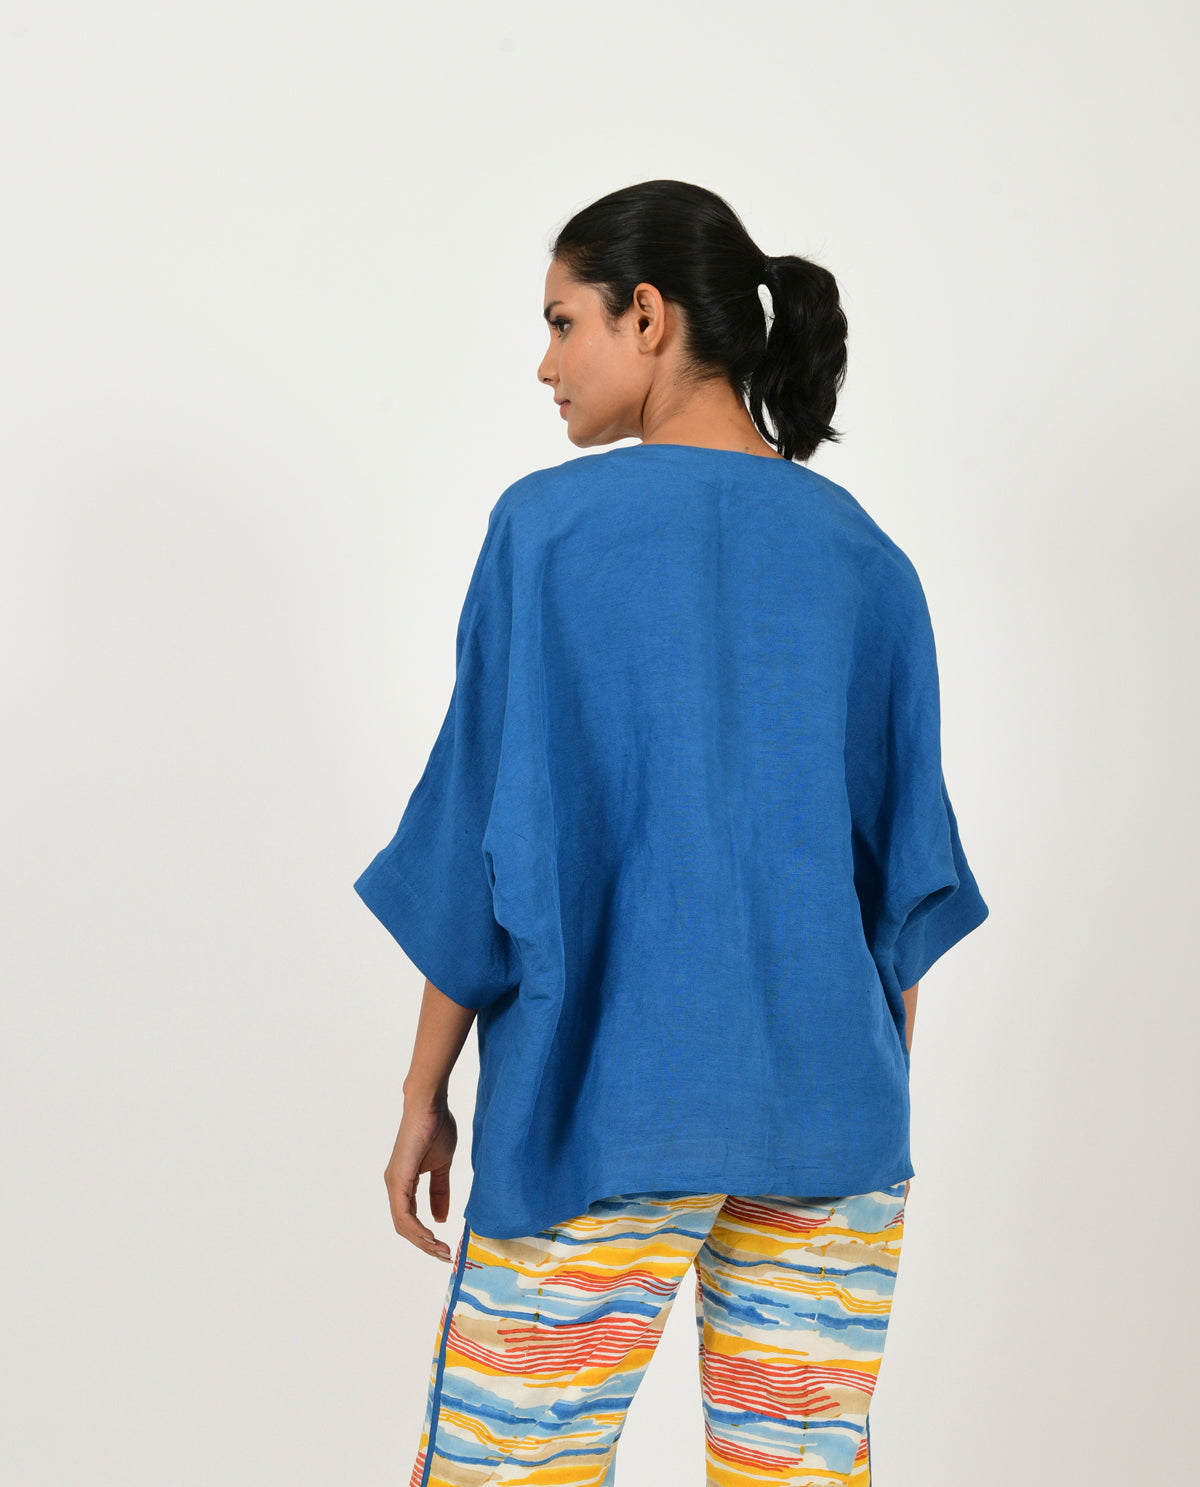 Blue Linen Overlay by Rias Jaipur with Blue, Casual Wear, Linen Blend, Natural, Relaxed Fit, Shrugs, Solids, Womenswear, Yaadein, Yaadein by Rias Jaipur at Kamakhyaa for sustainable fashion